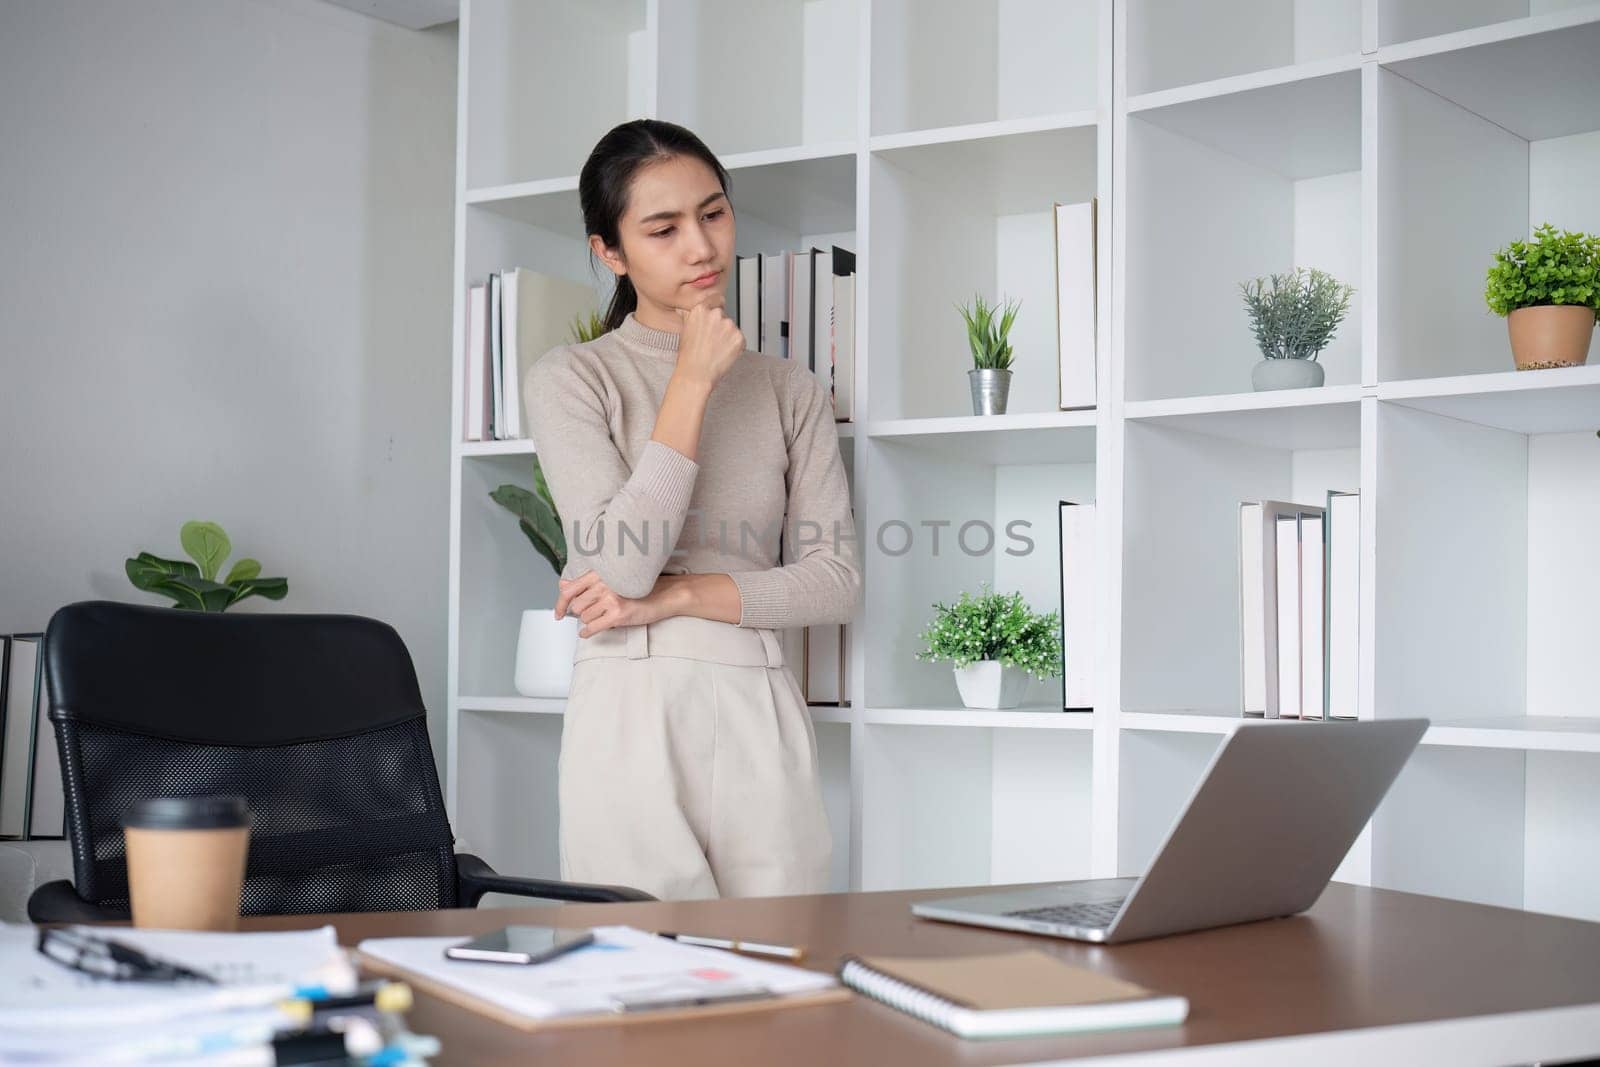 Asian businesswoman feeling tired and stressed over an unsuccessful business while working in a home office decorated with soothing green plants..